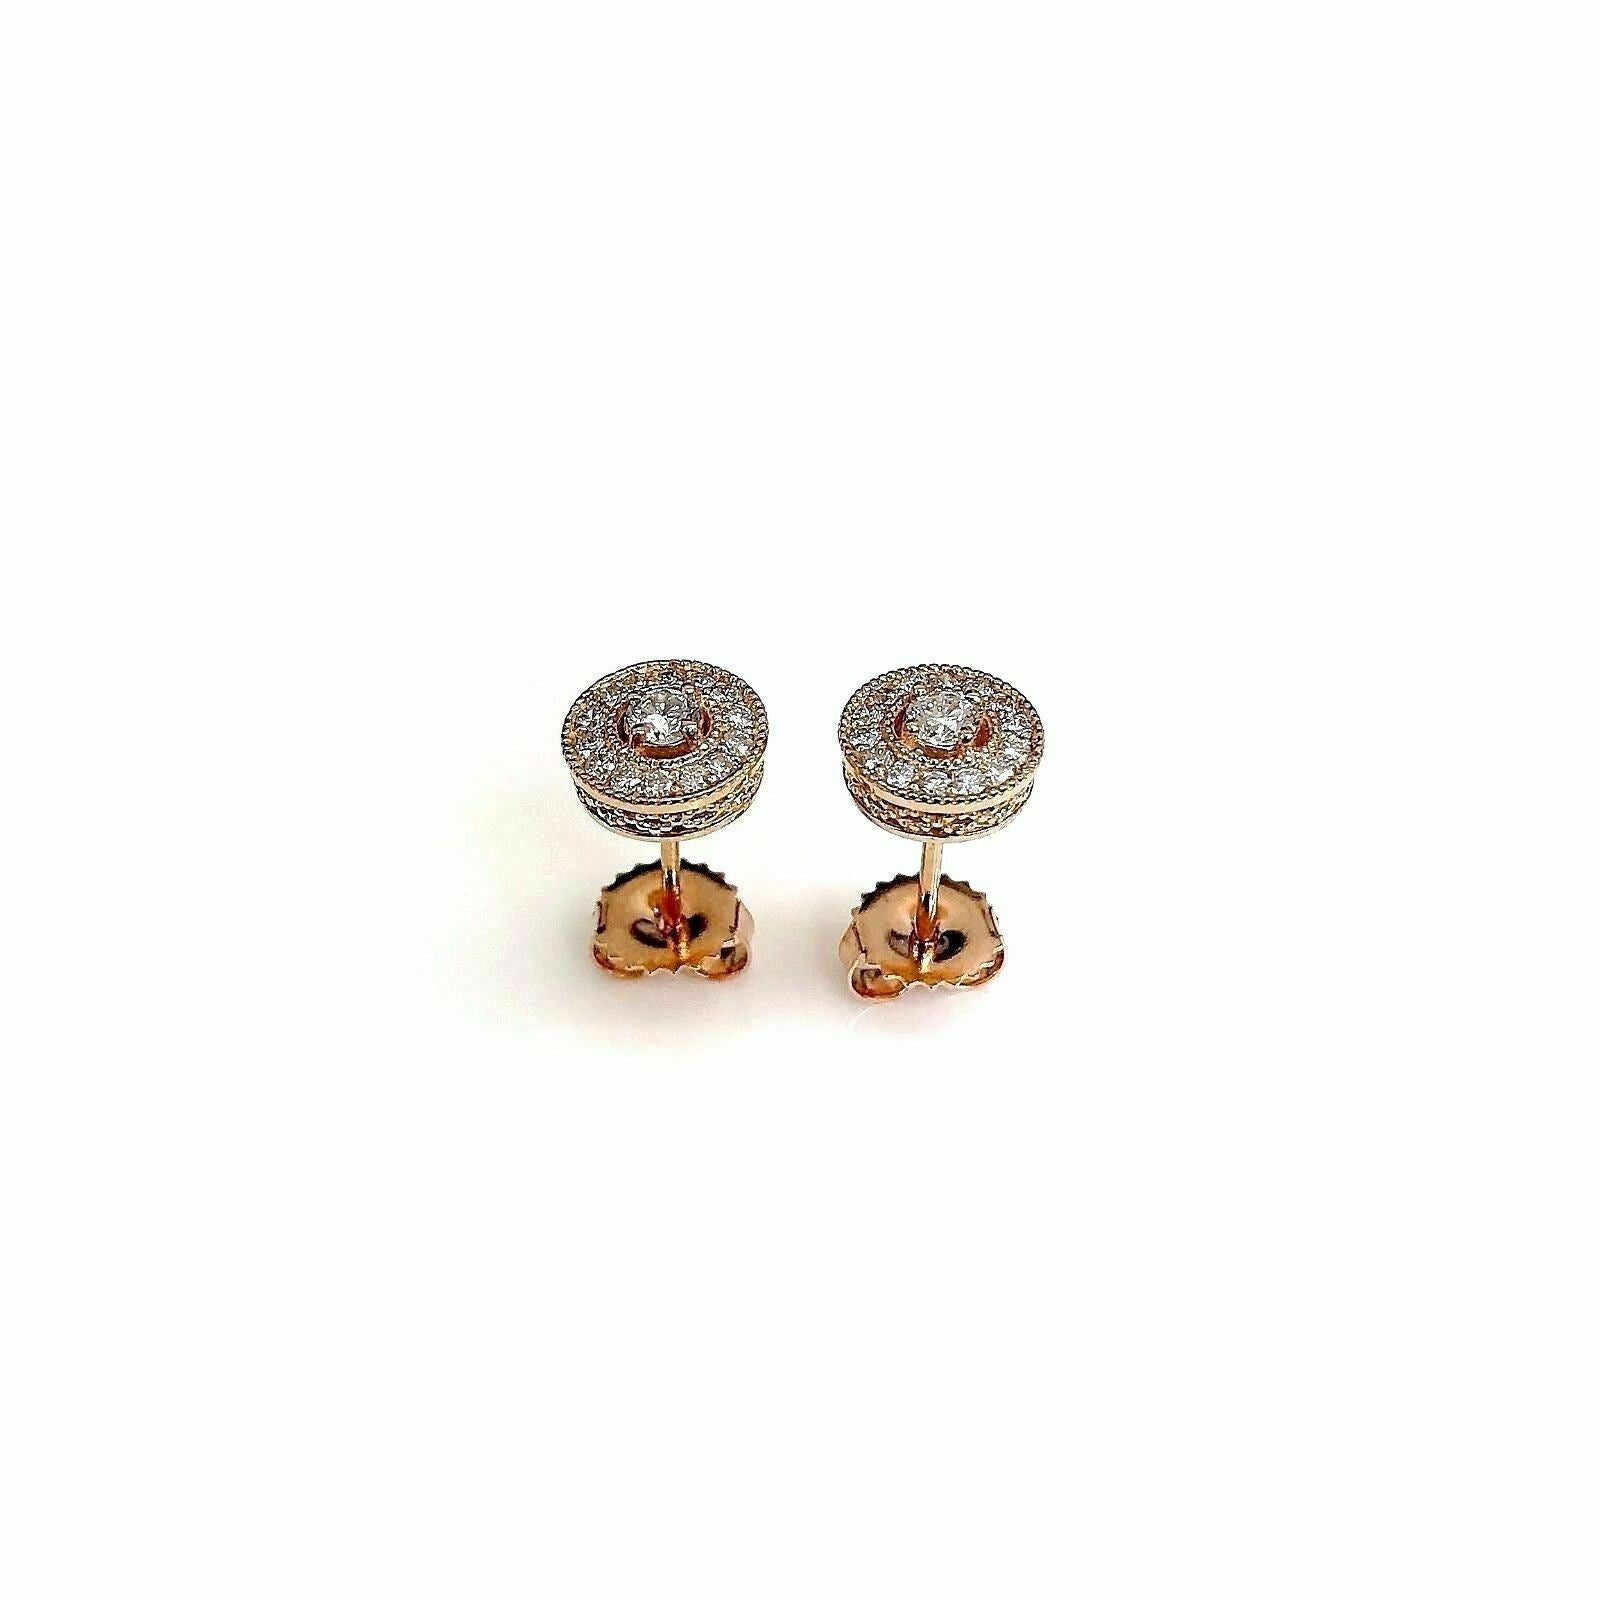 0.55 Carats t.w. Round Diamond Millgrain Halo Earrings 14K Pink Rose Gold New